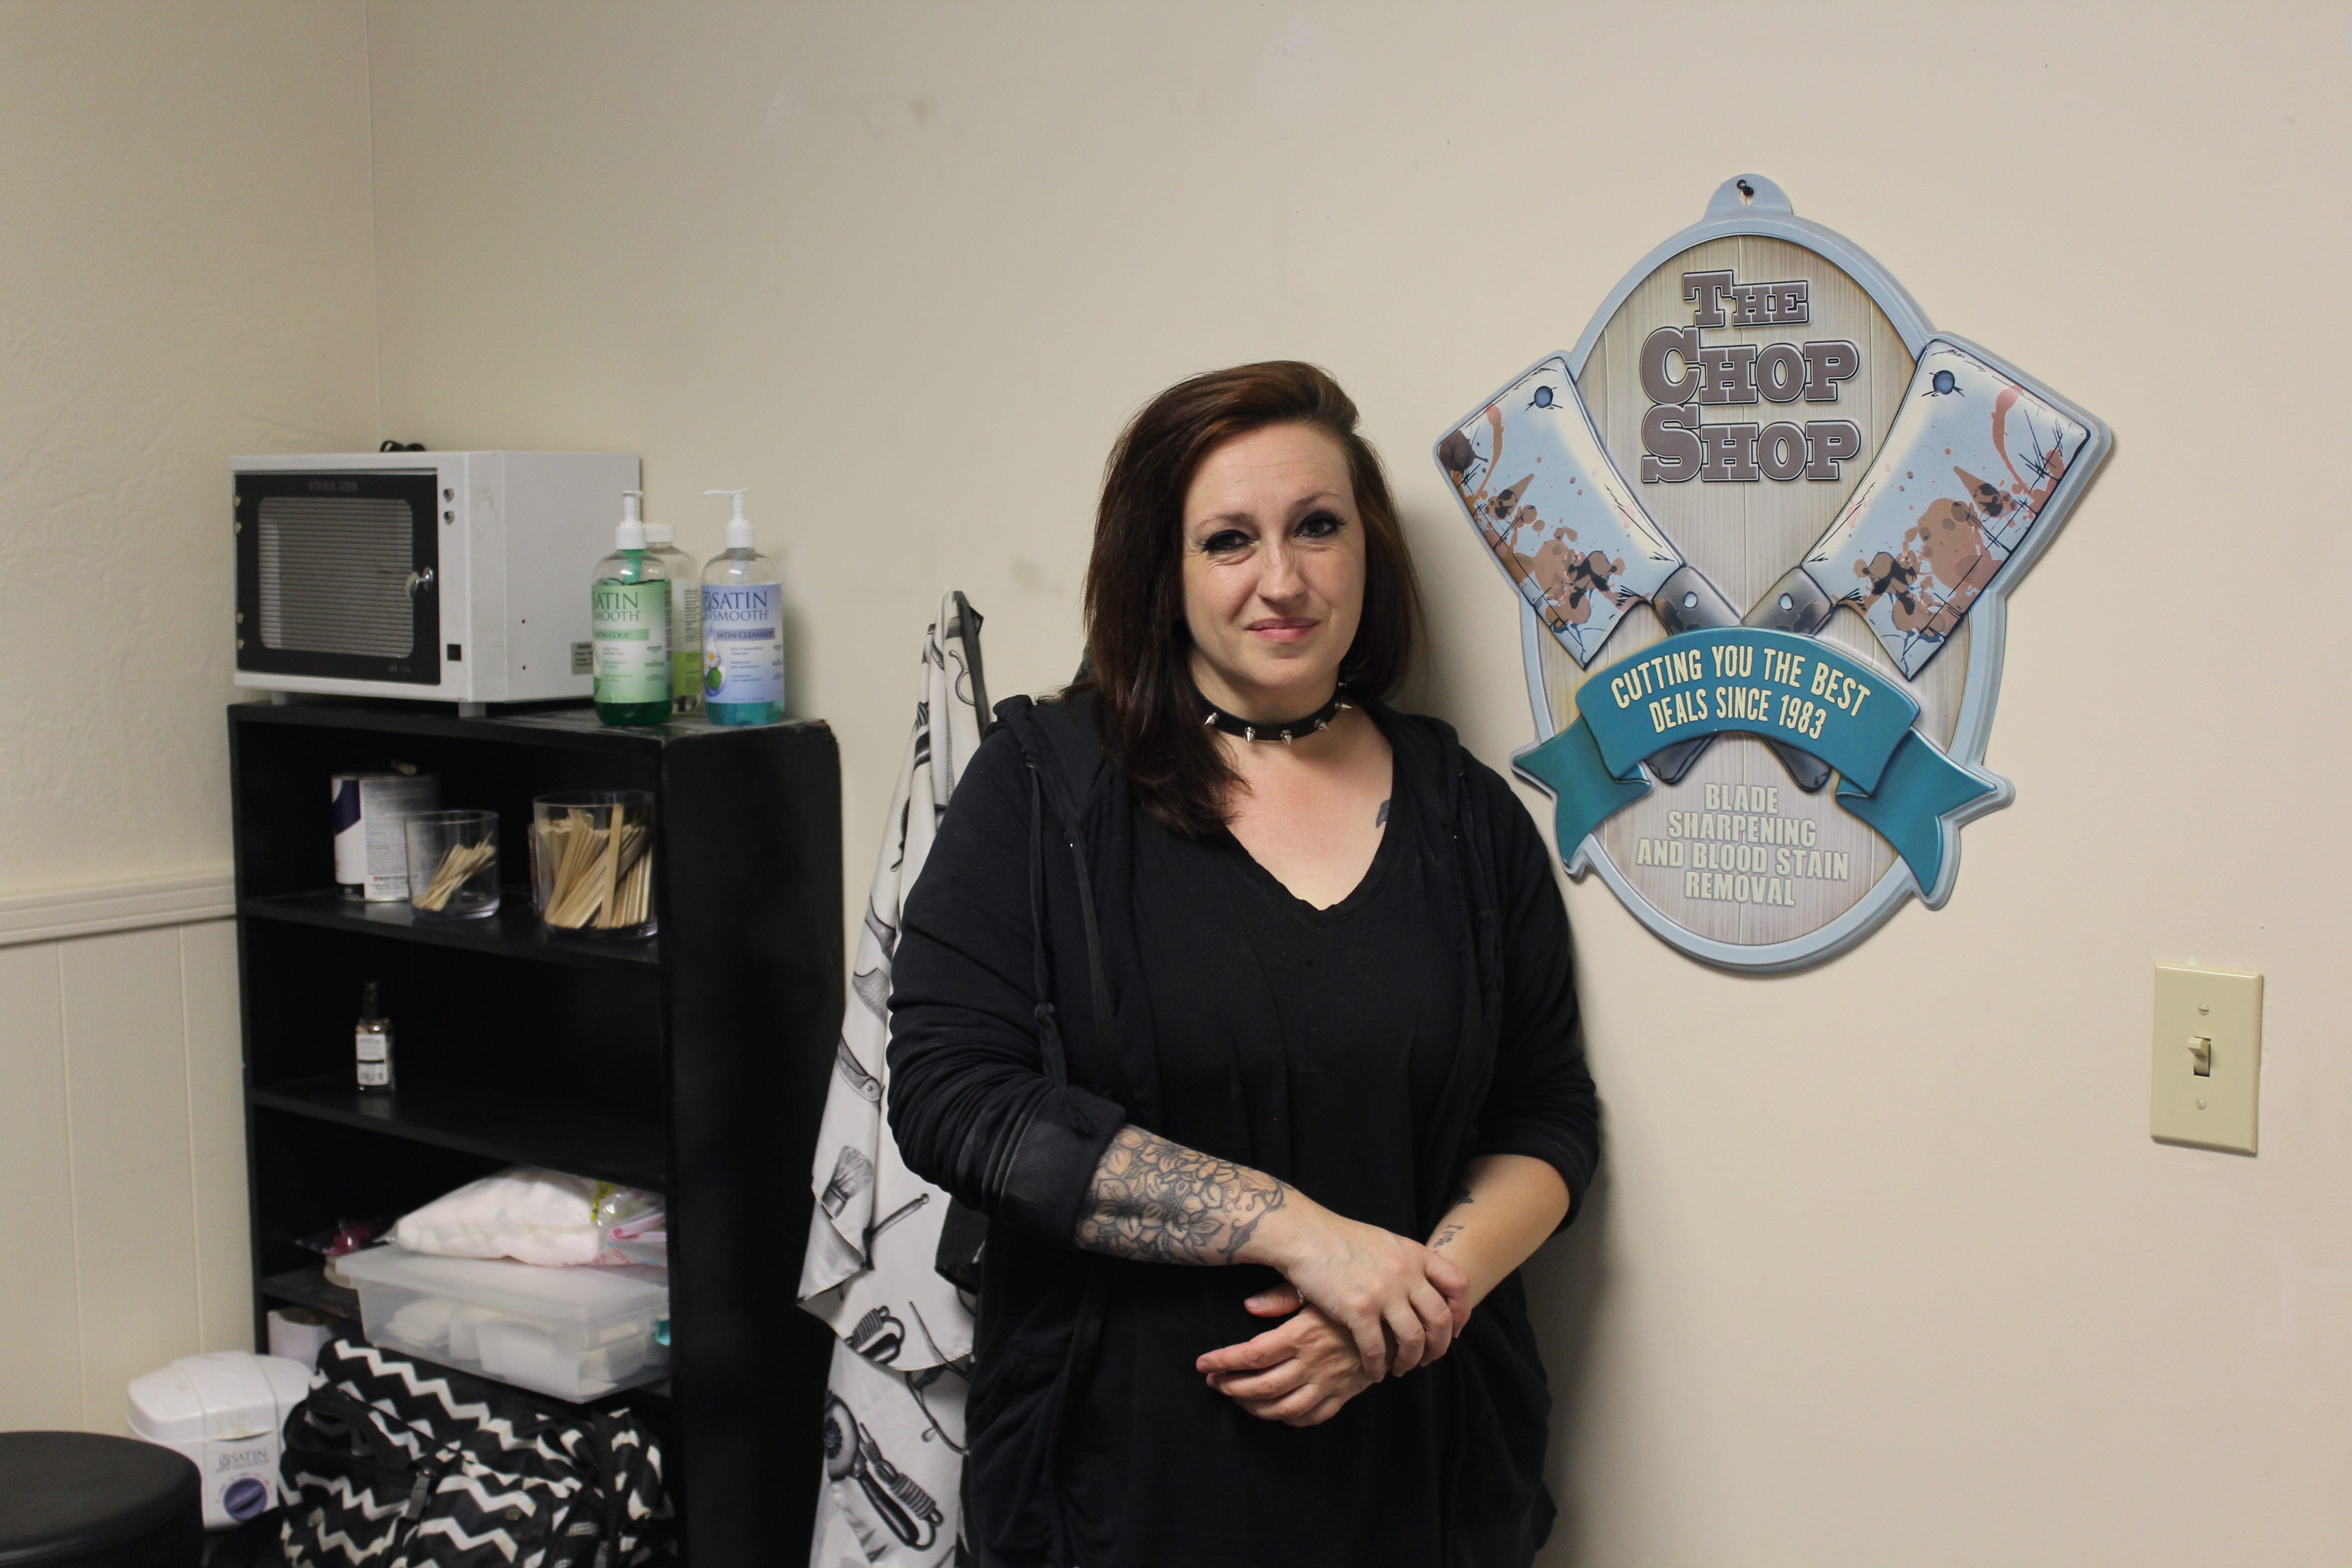 Amanda's Chop Shop brings traditional barber services to Wellsville, opens on Main Street